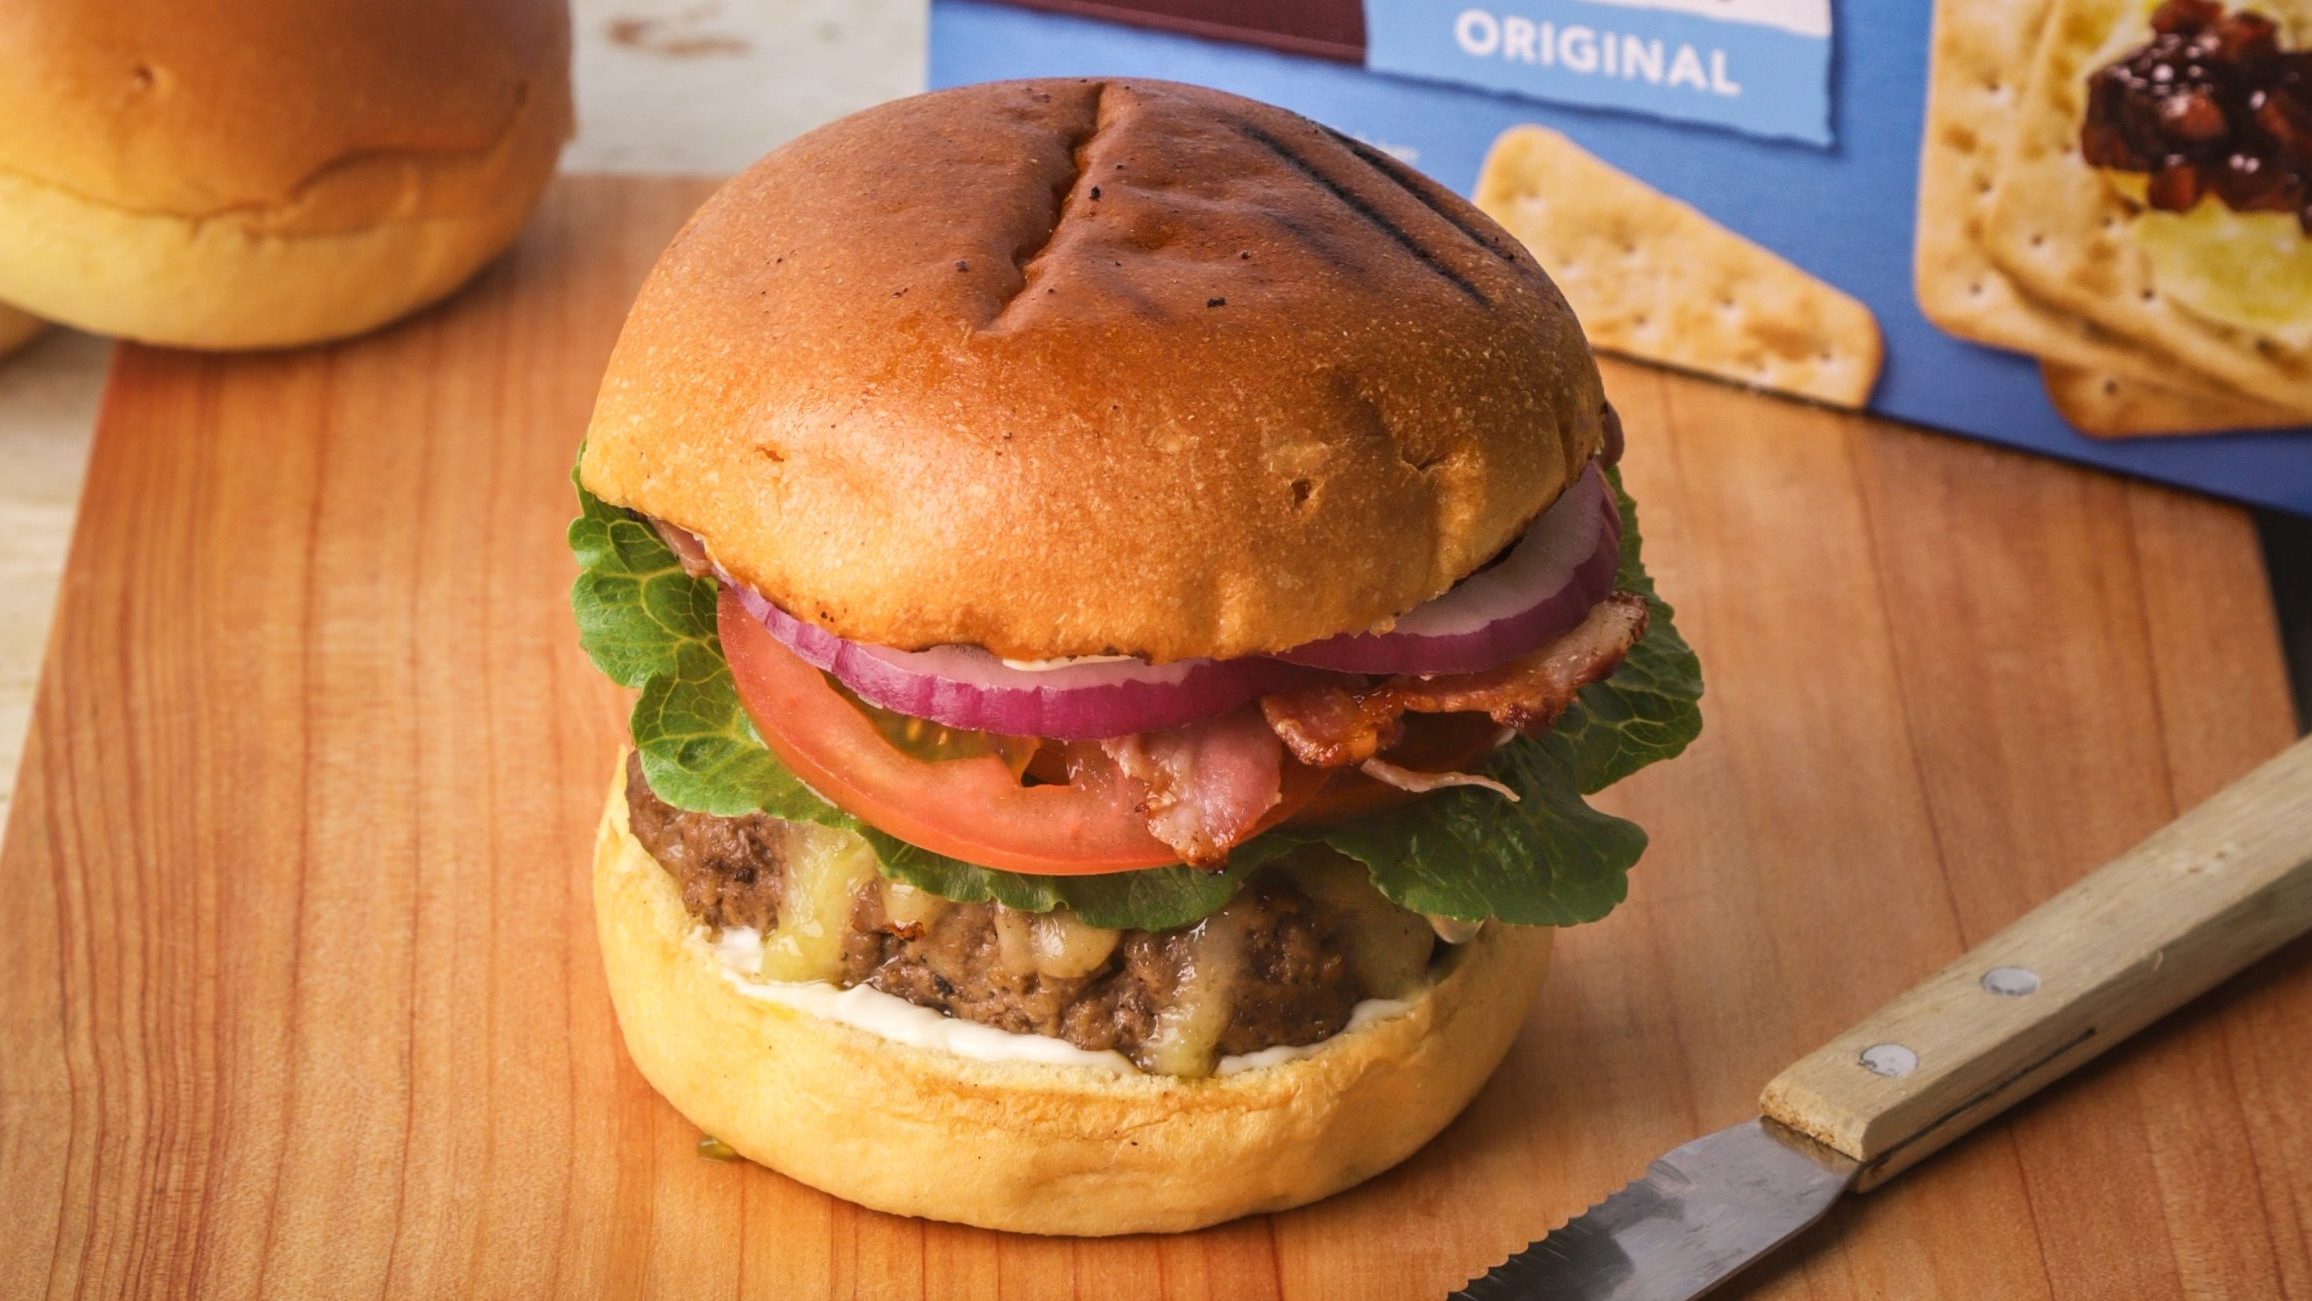 A burger with thick beef patty, lettuce, tomato, red onion. A box of crackers at rear.